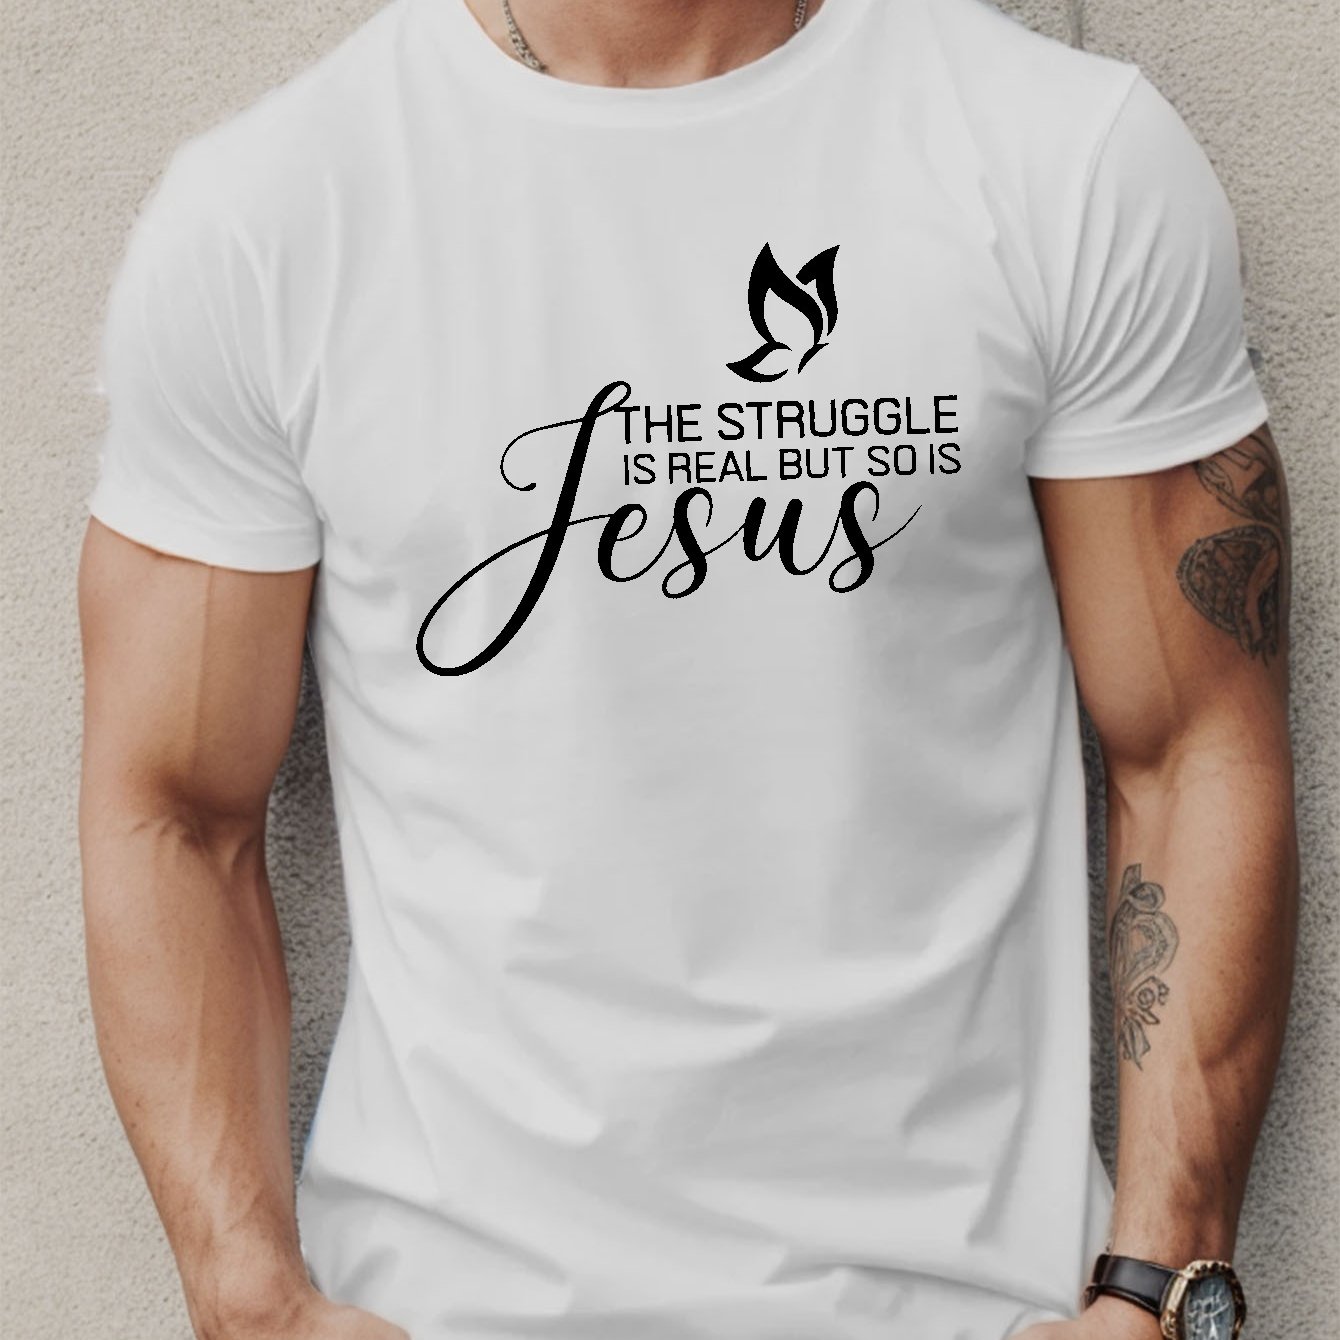 THE STRUGGLE IS REAL Print Men's T-shirt Short Sleeve Crew Neck Tops Cotton Comfortable Breathable Spring Summer Clothing For Men claimedbygoddesigns